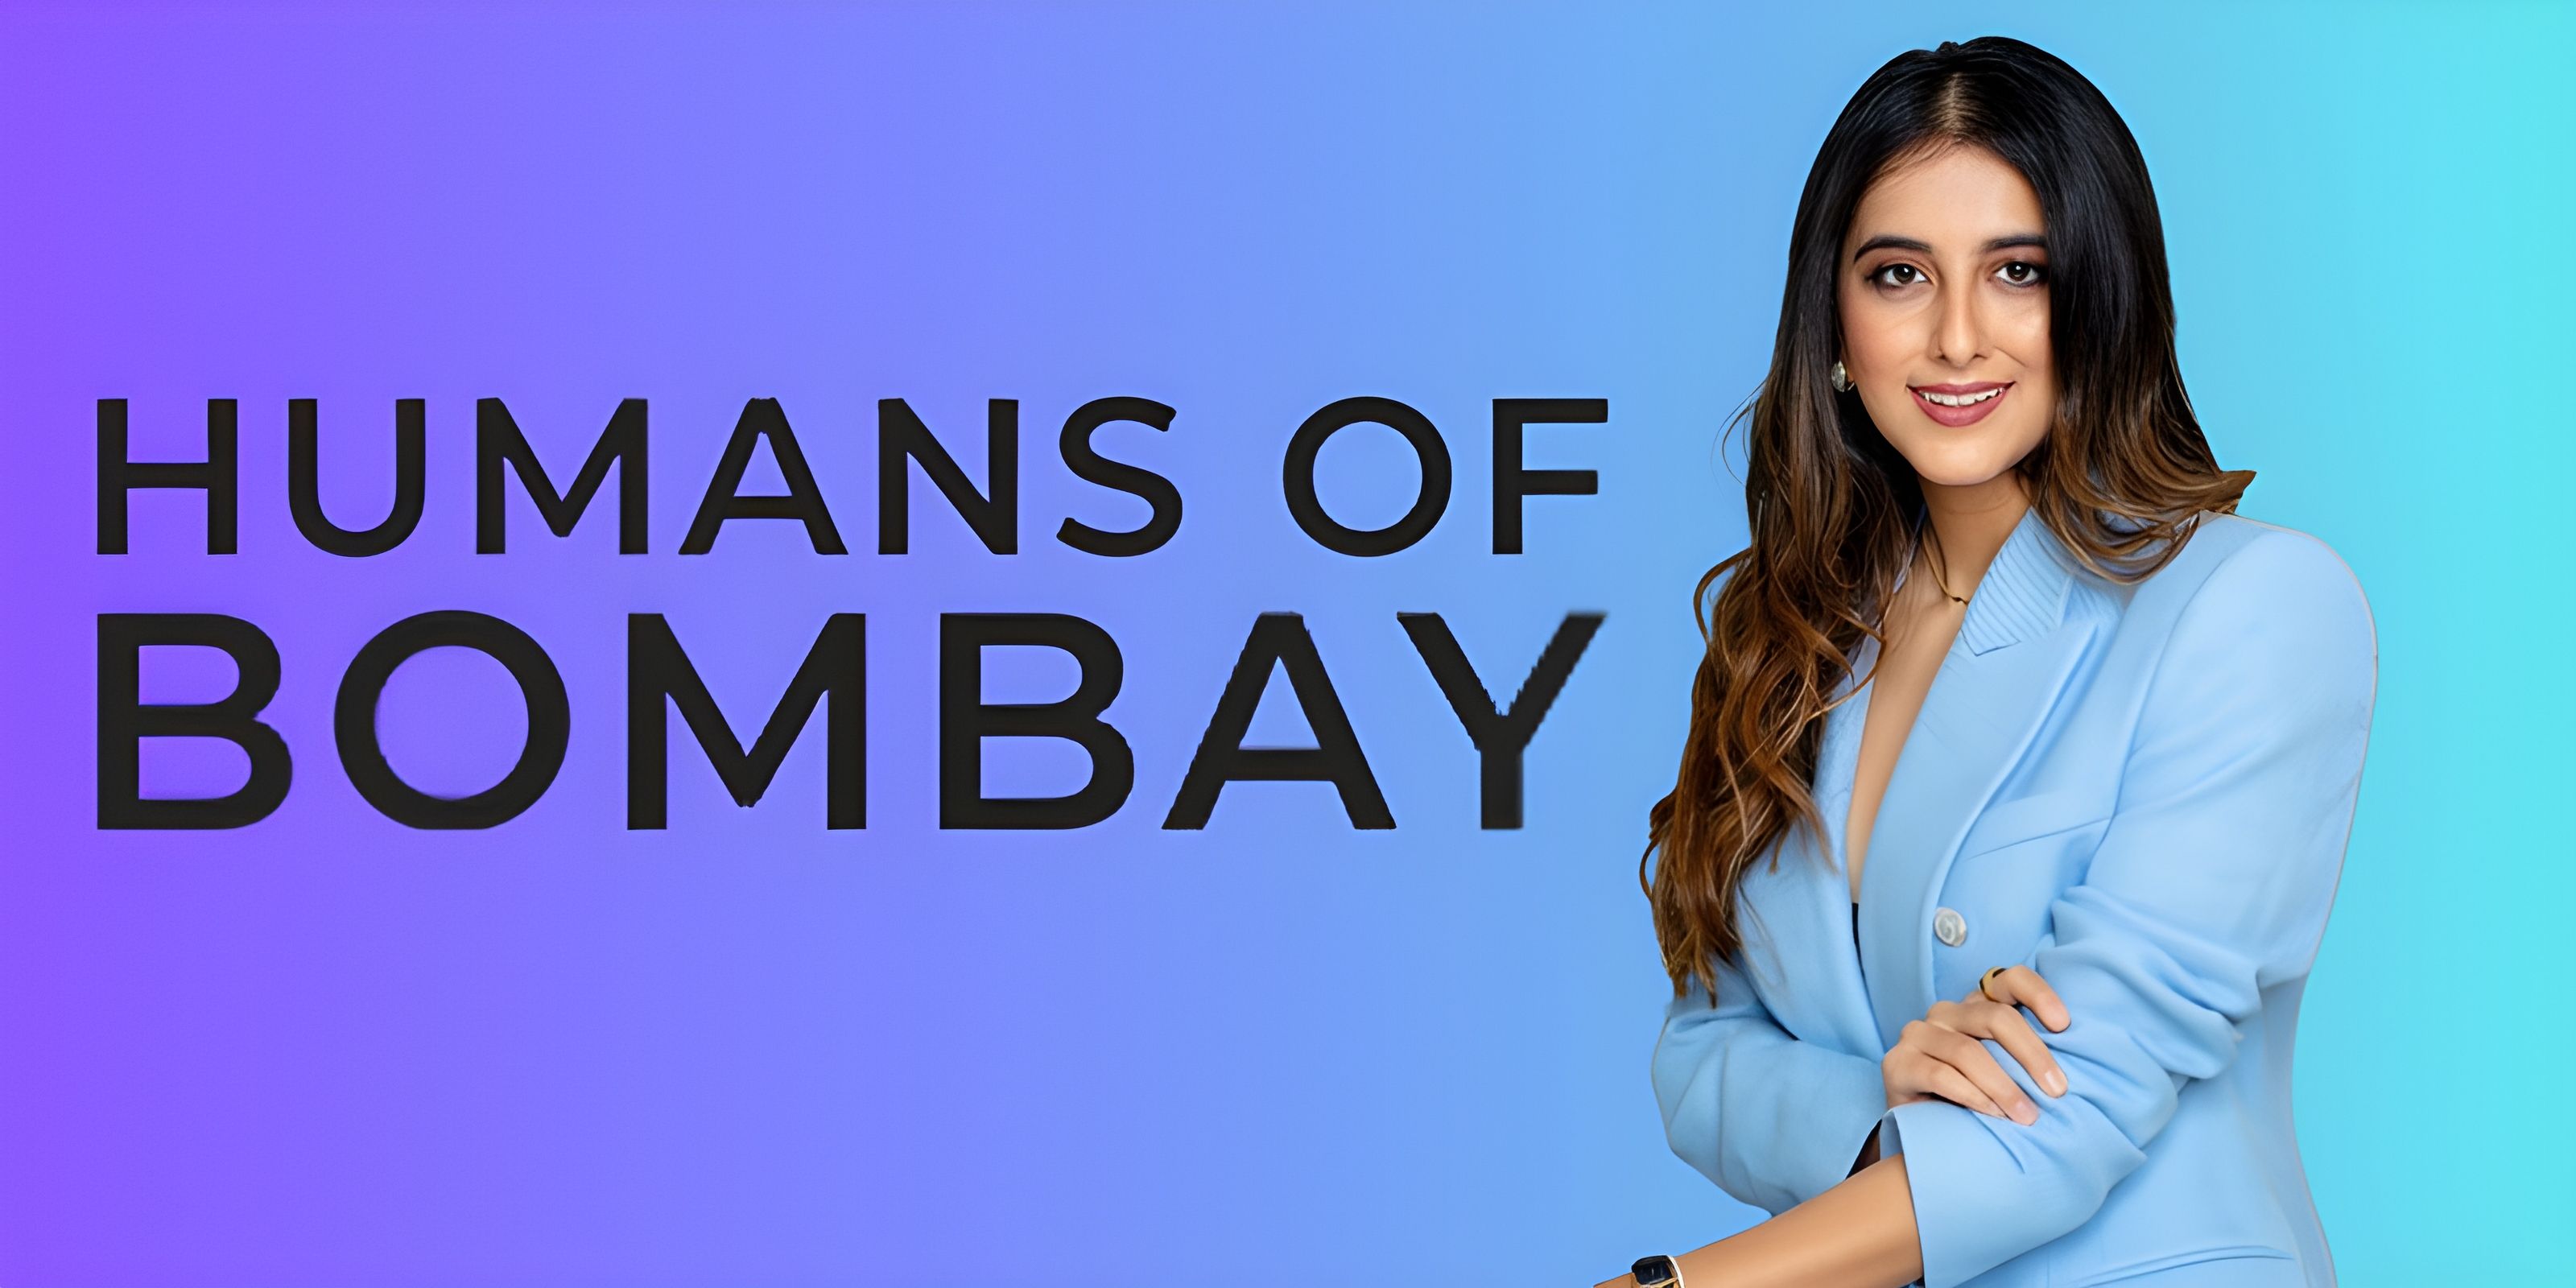 Karishma Mehta: The Untold Story of 'Humans of Bombay' and Its Controversy